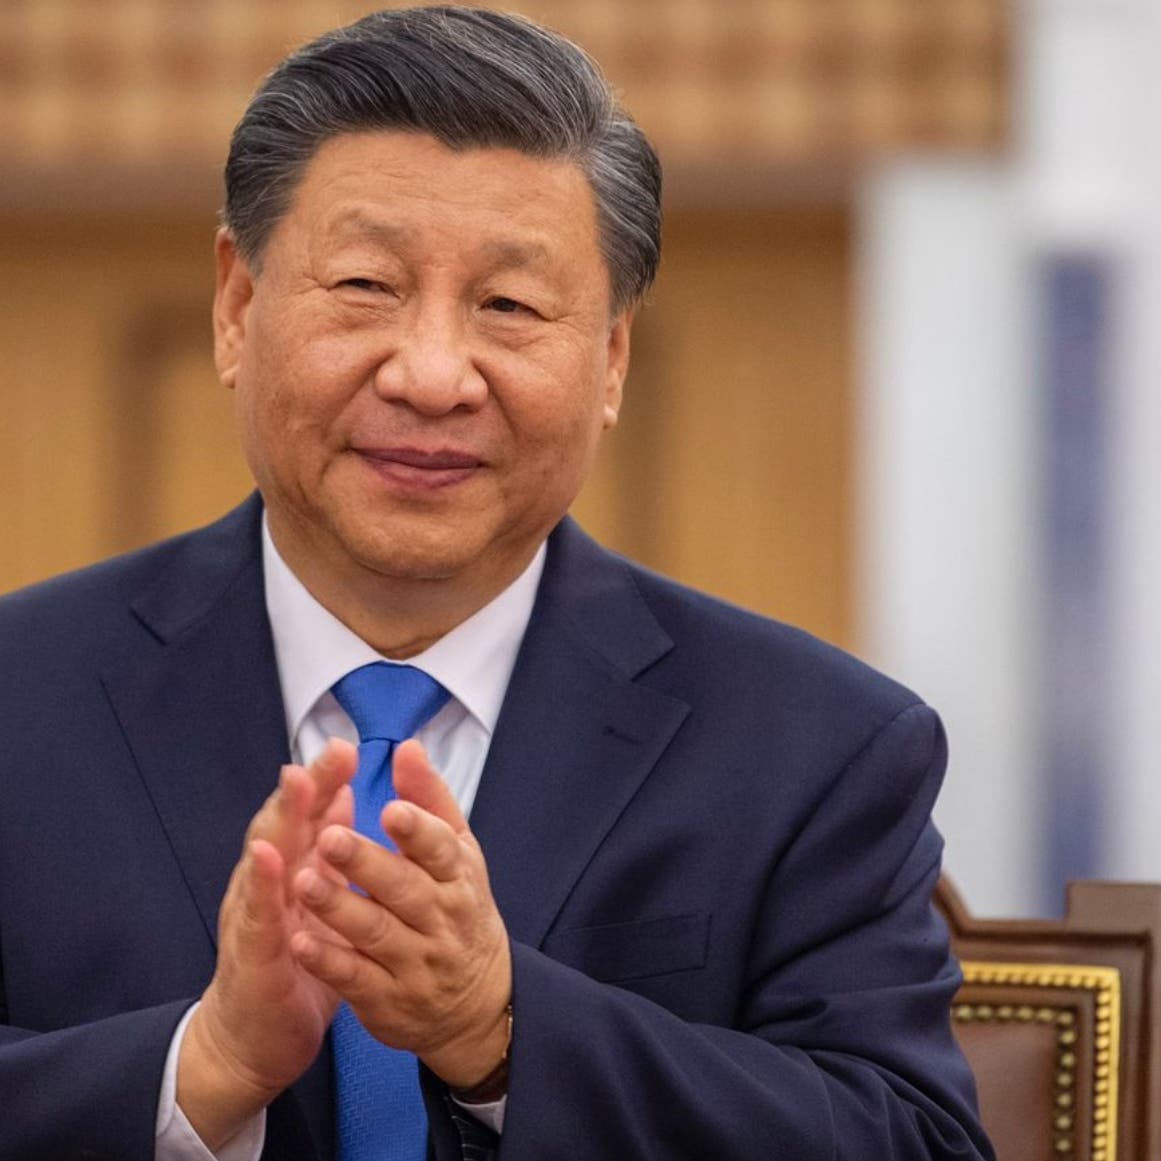 Chinese frankness about Covid. Xi reveals the size of the economy's growth in 2022